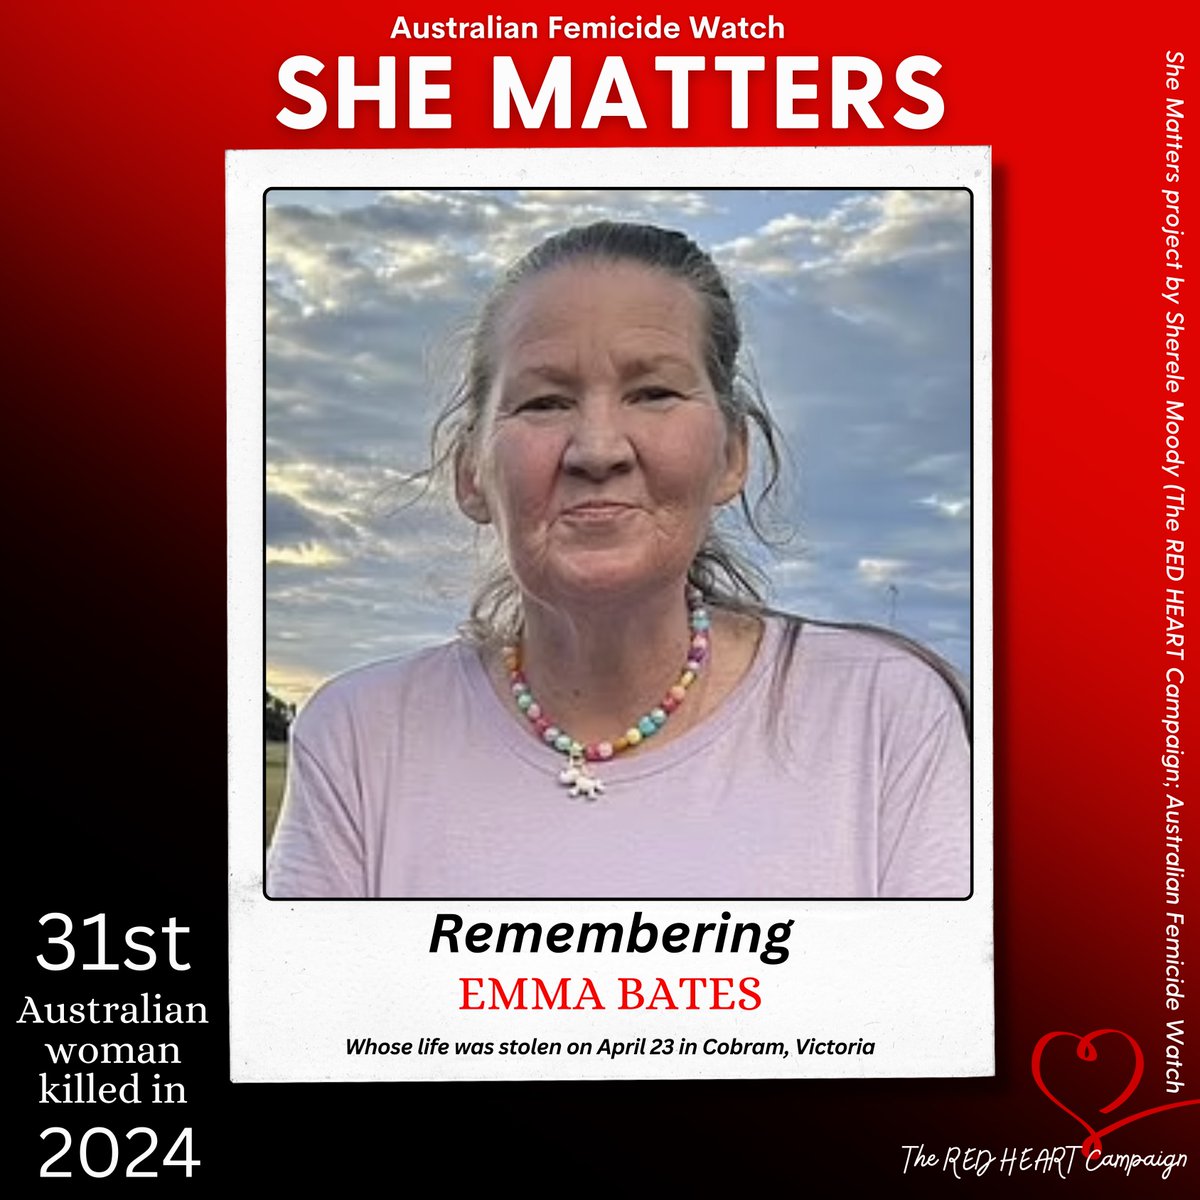 ❤️SHE MATTERS: EMMA BATES!❤️ April 23, 2024: Emma Bates, 49, was killed in her home at Cobram, Victoria, on Tuesday. Her male neighbour is facing multiple charges over her death. Emma is the 31st Australian woman killed in 2024 and the 11th lost to violence in April.